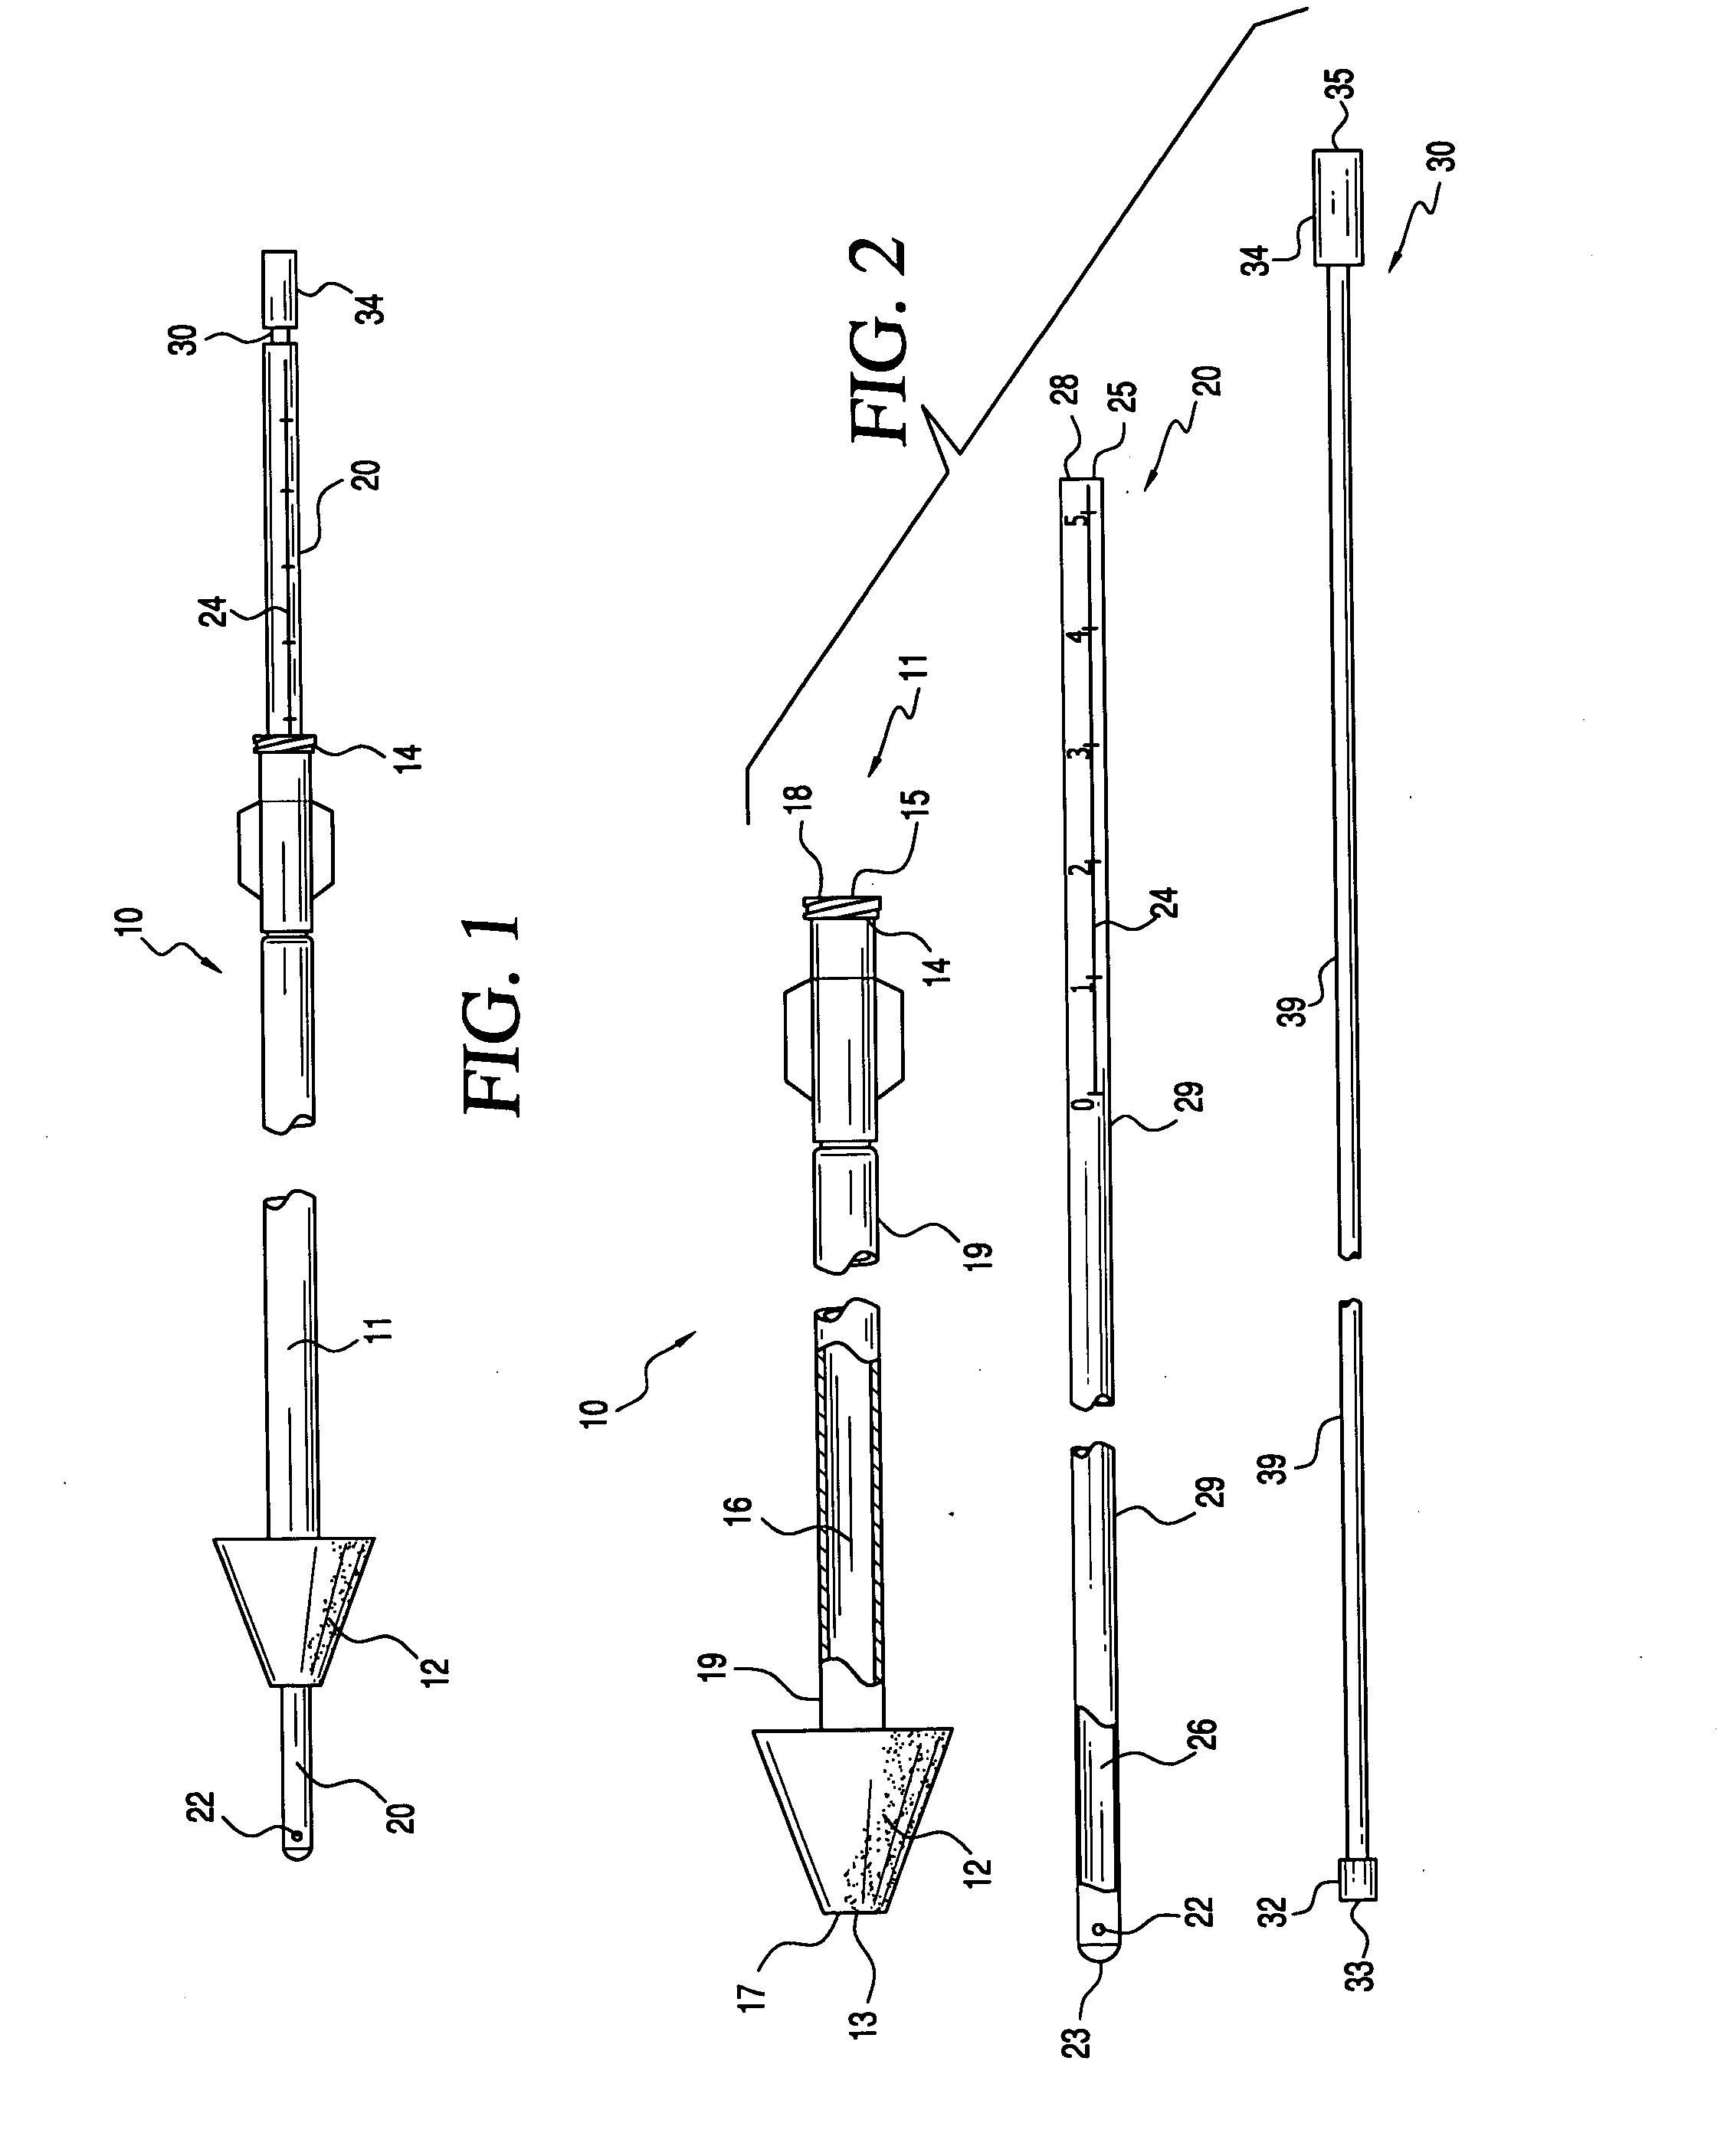 Intrauterine anesthetic applicator and cell collection device and method of use